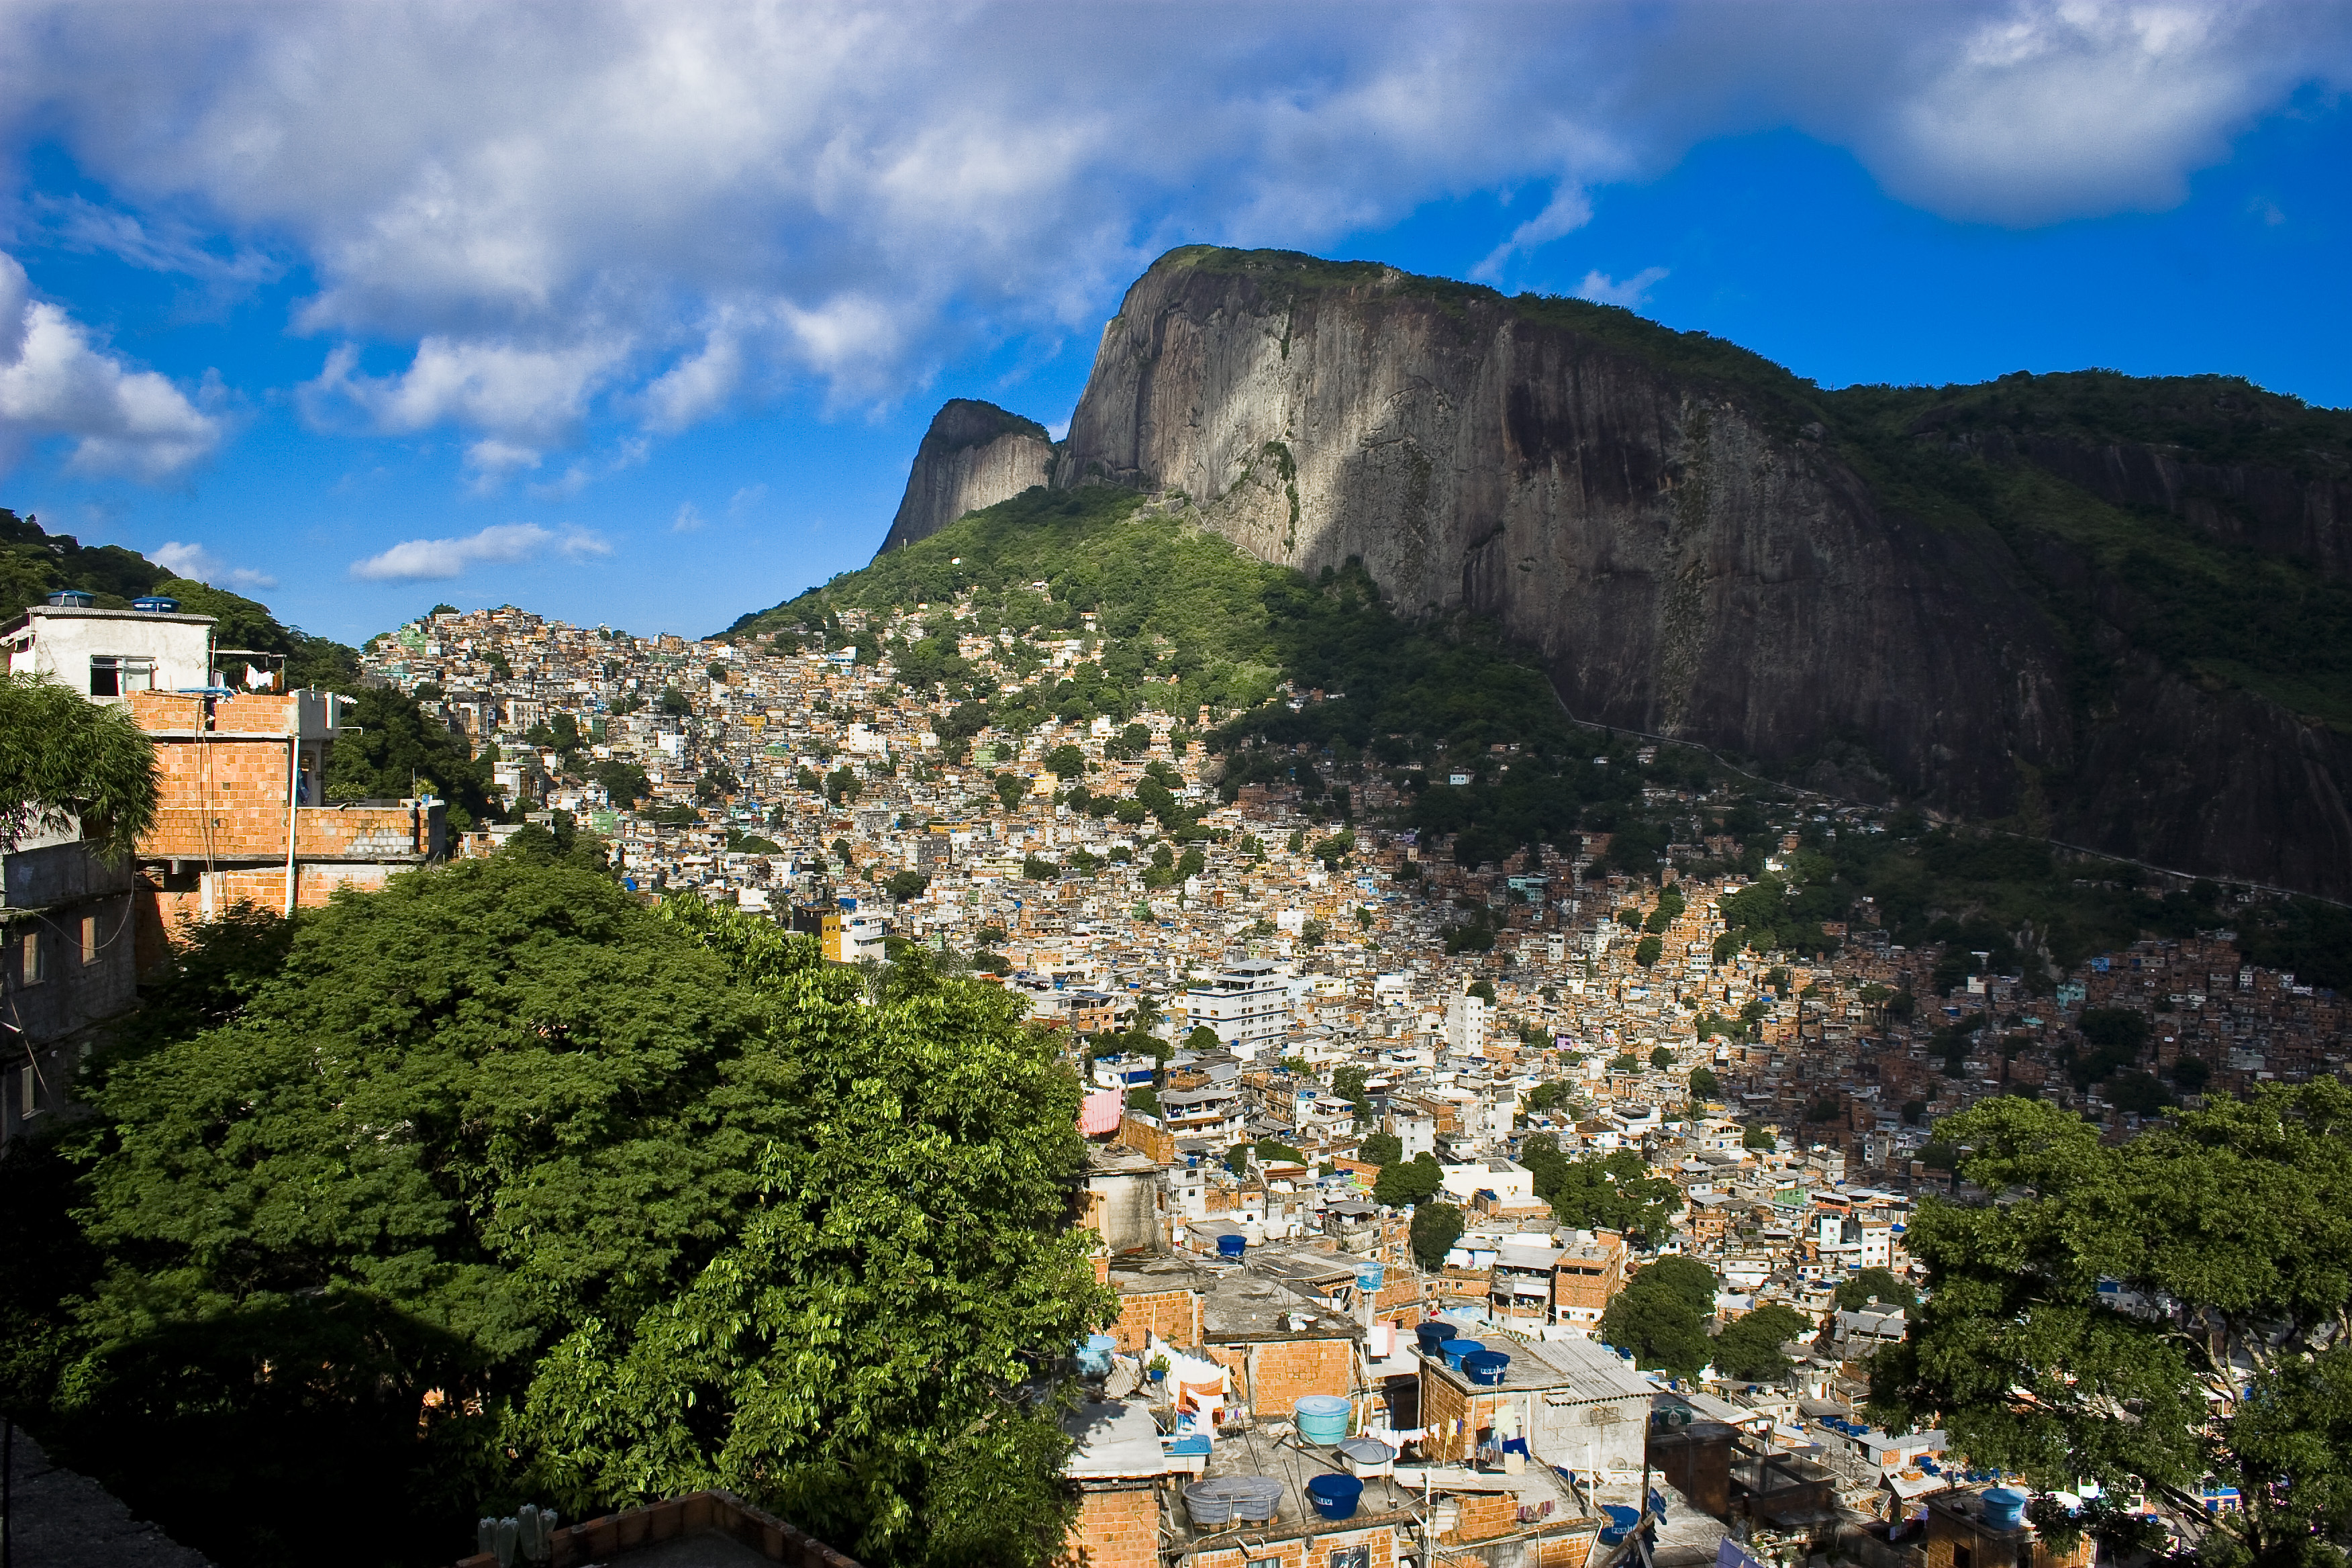 A city in the city: Rocinha is home to some 200,000 people.